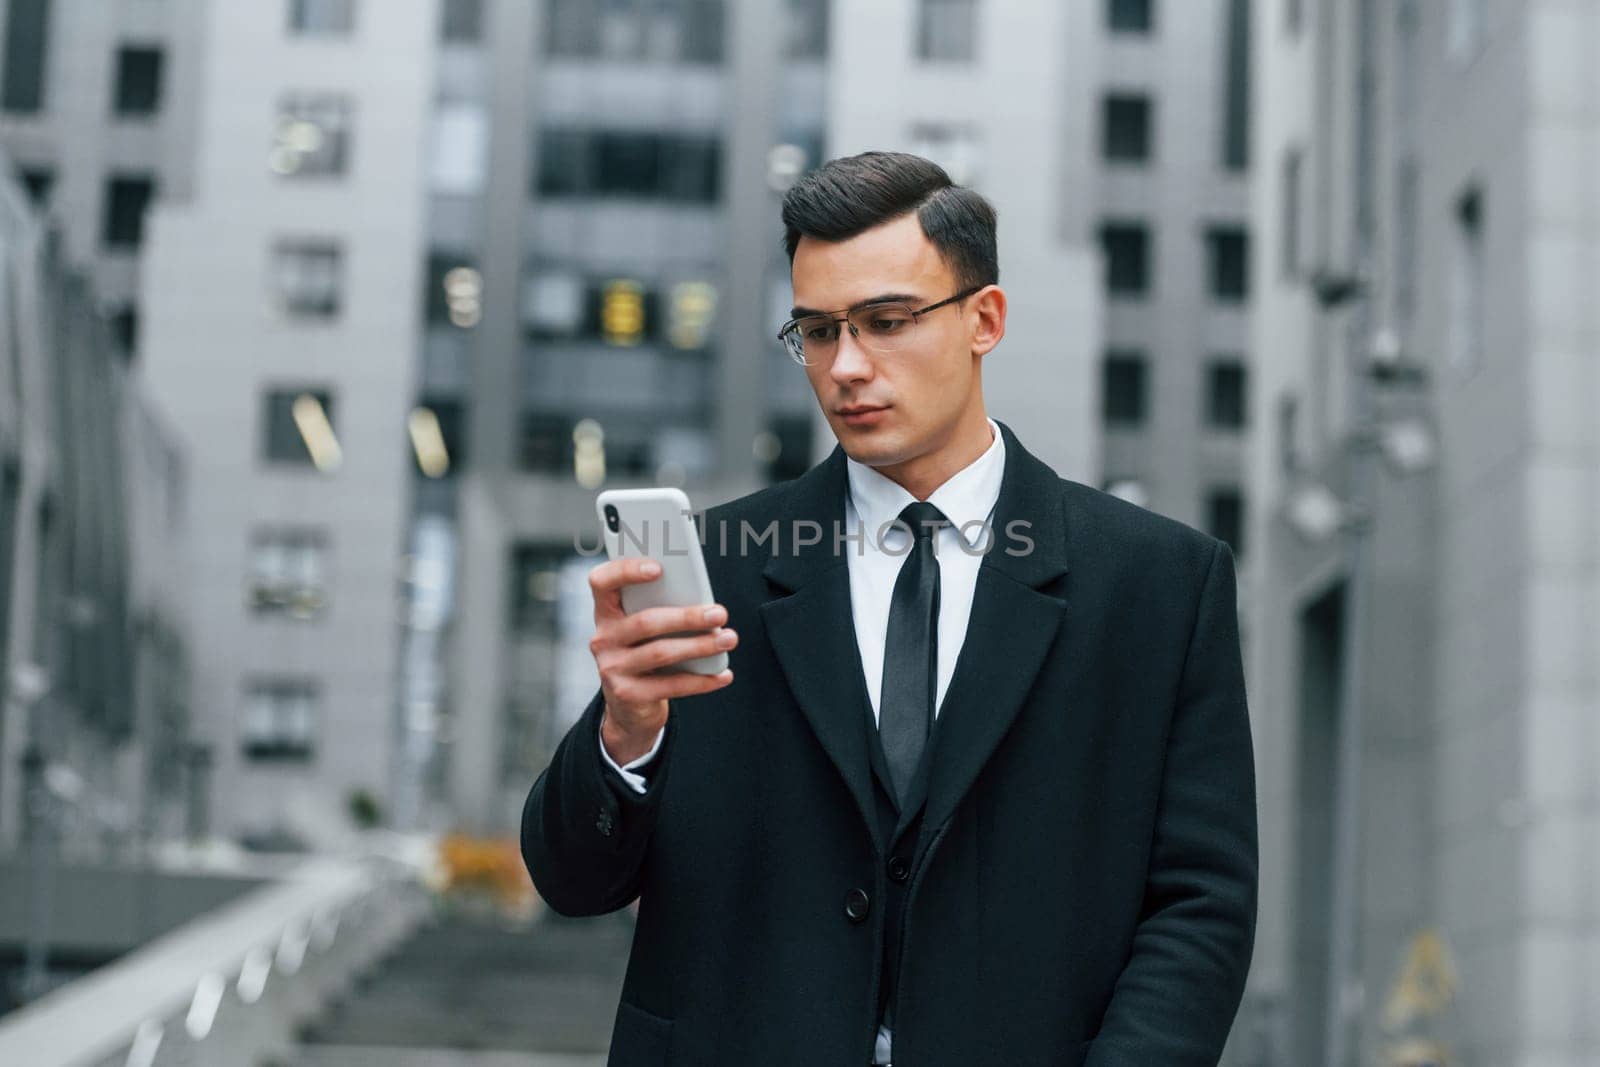 With smartphone. Businessman in black suit and tie is outdoors in the city by Standret